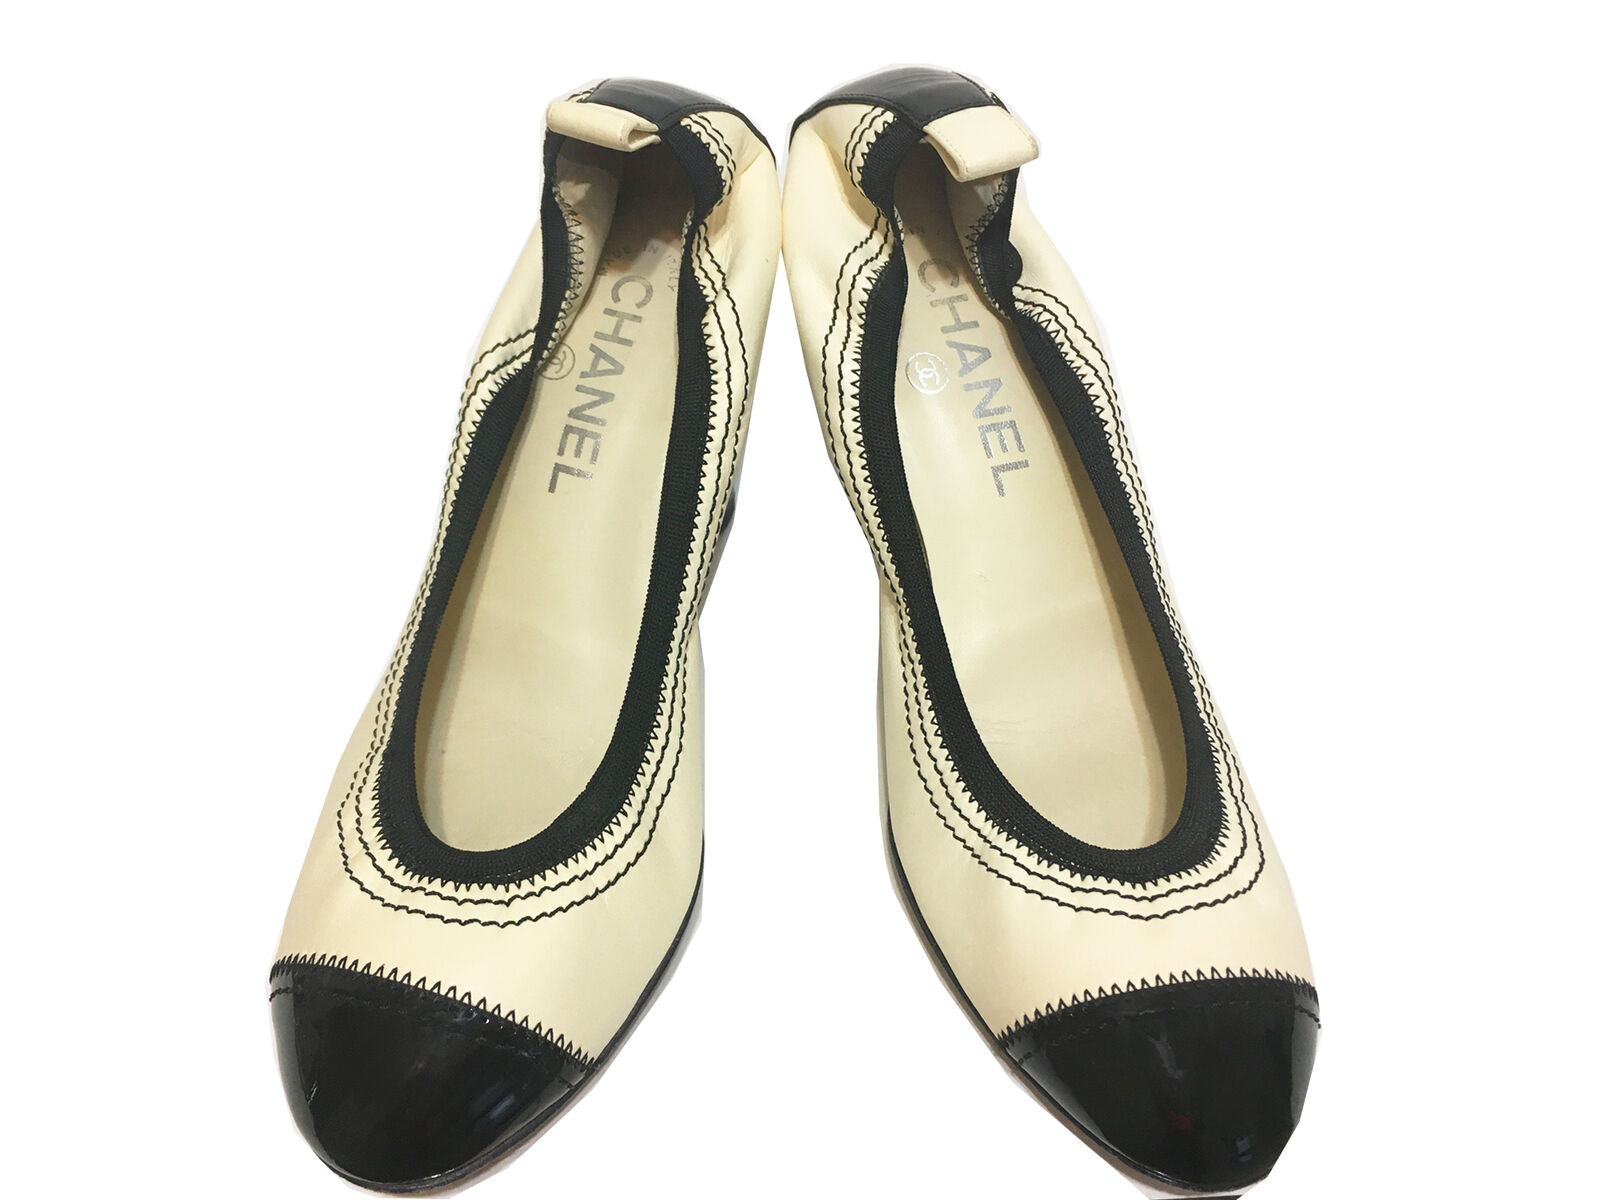 Chanel Leather & Patent Pumps Ivory & Black Size 37.5